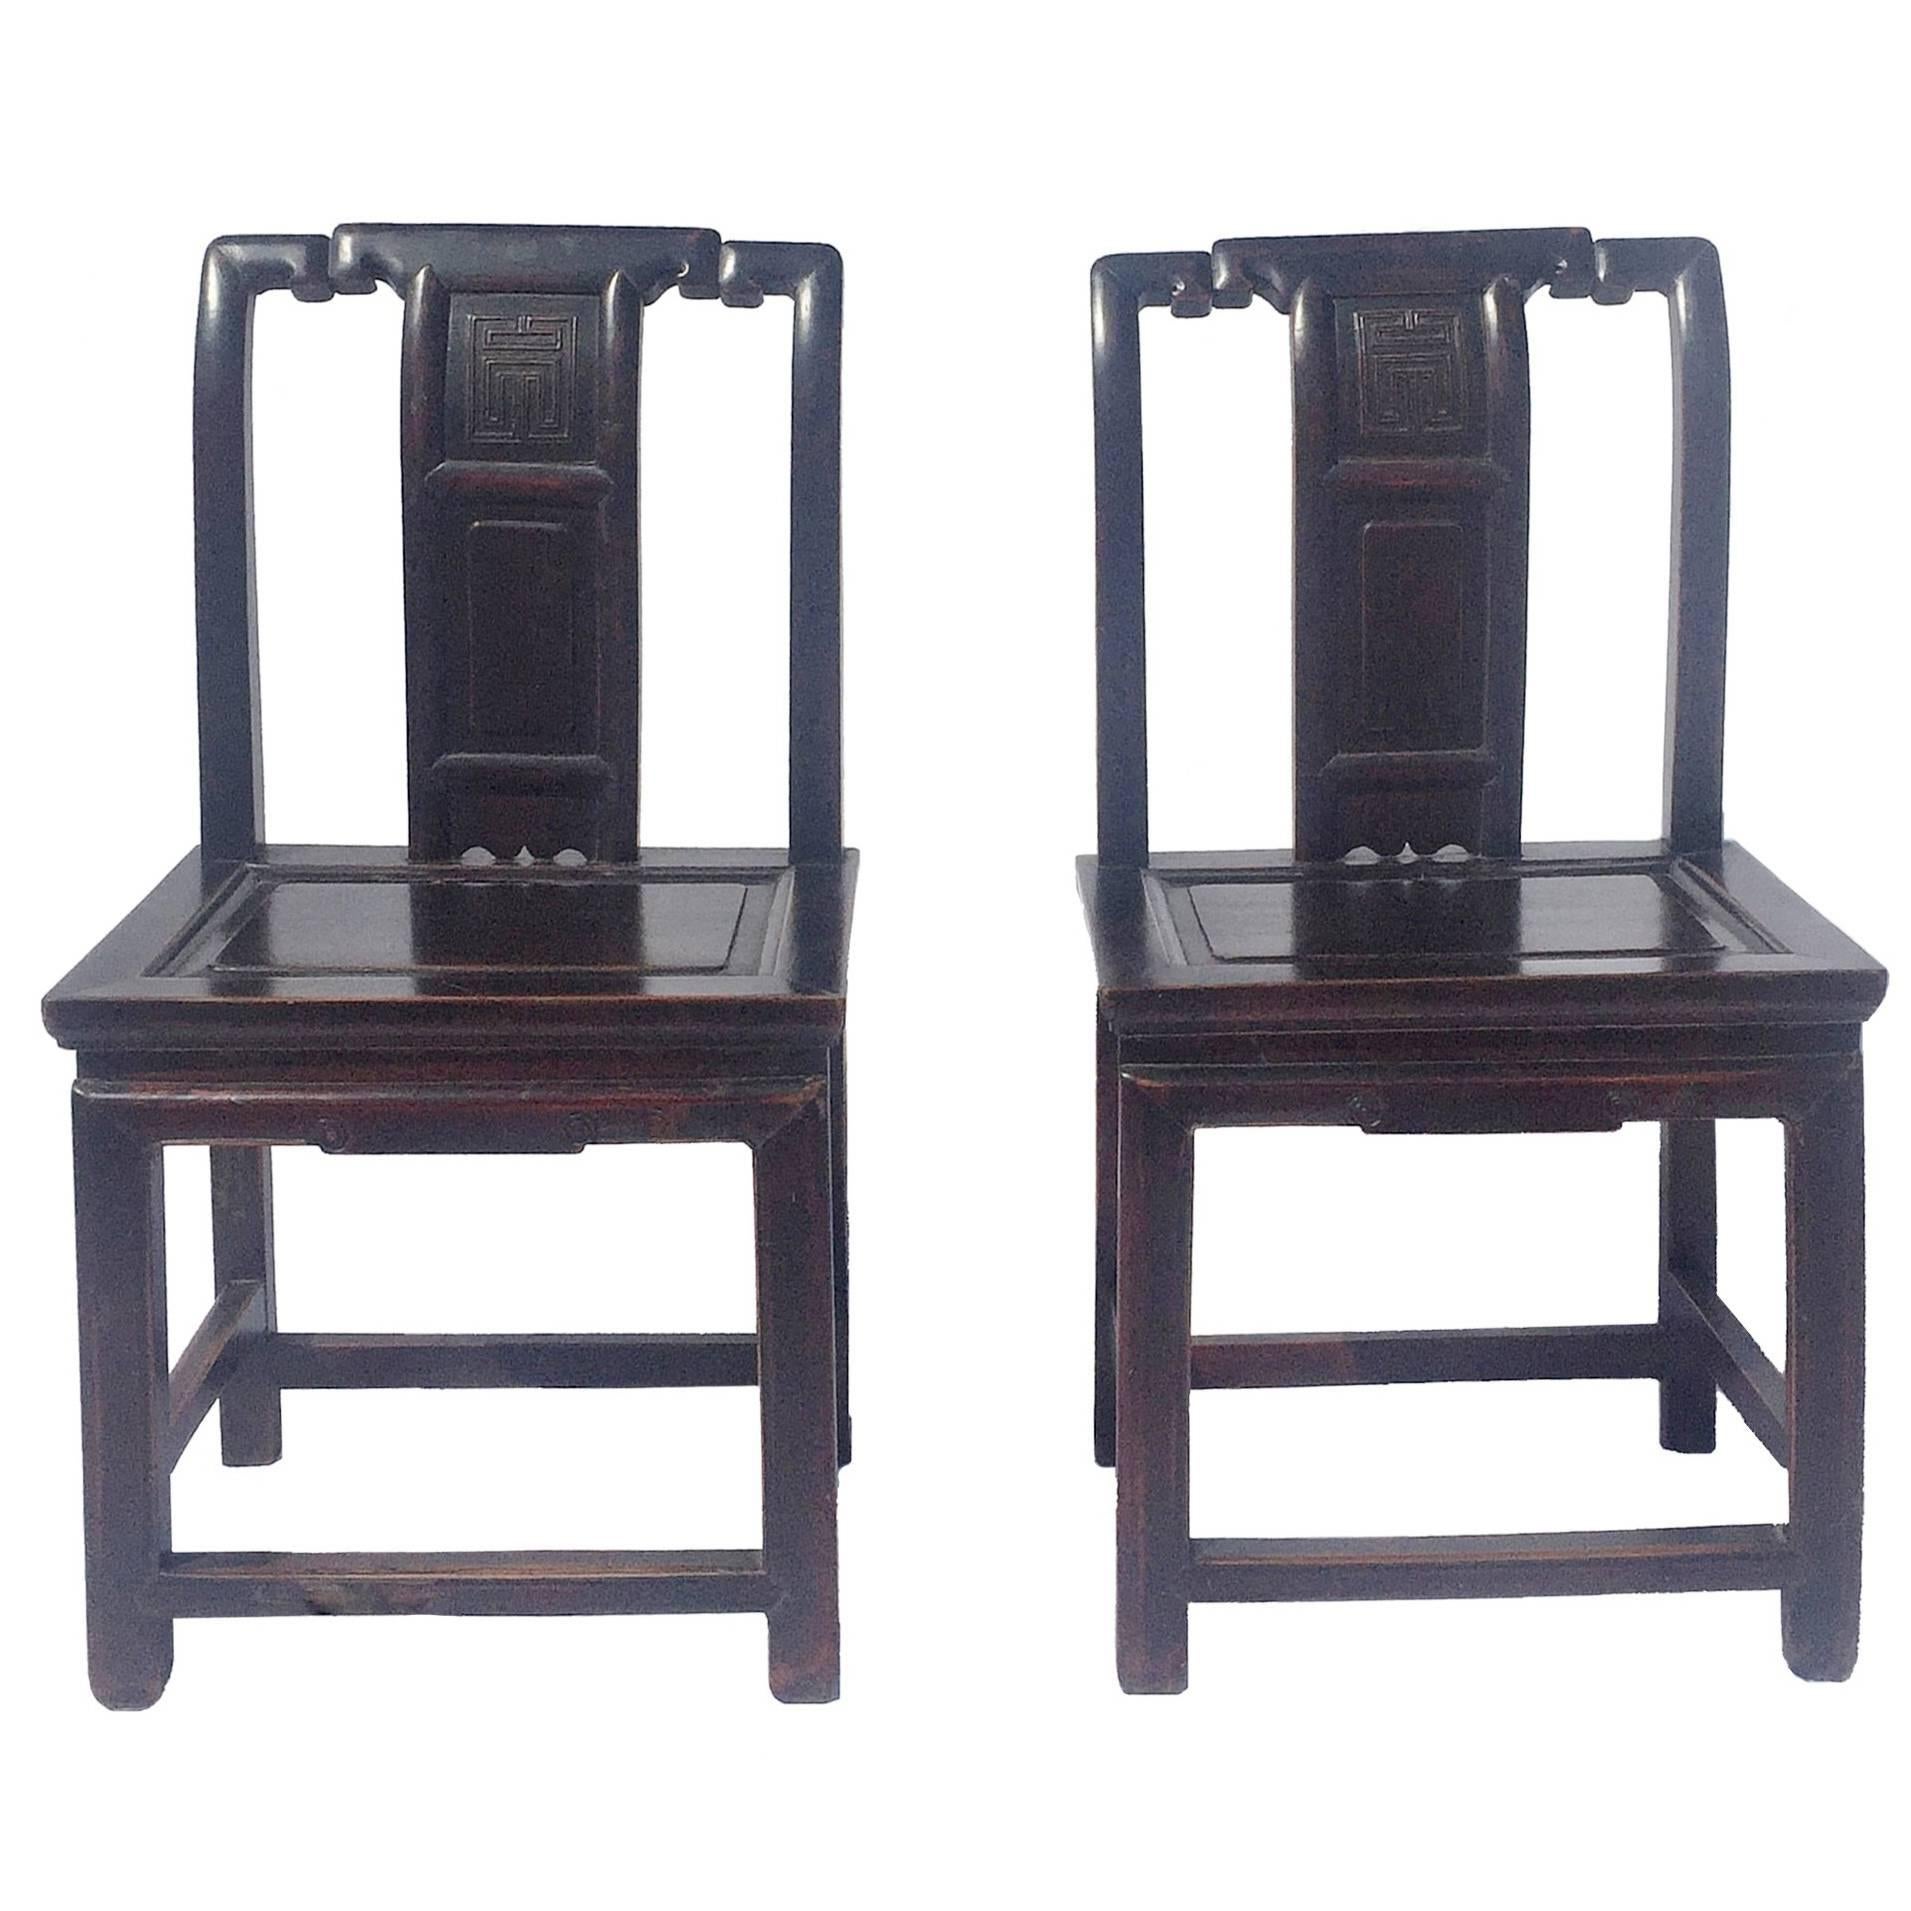 Pair of Chinese Antique Chairs with Longevity Motif